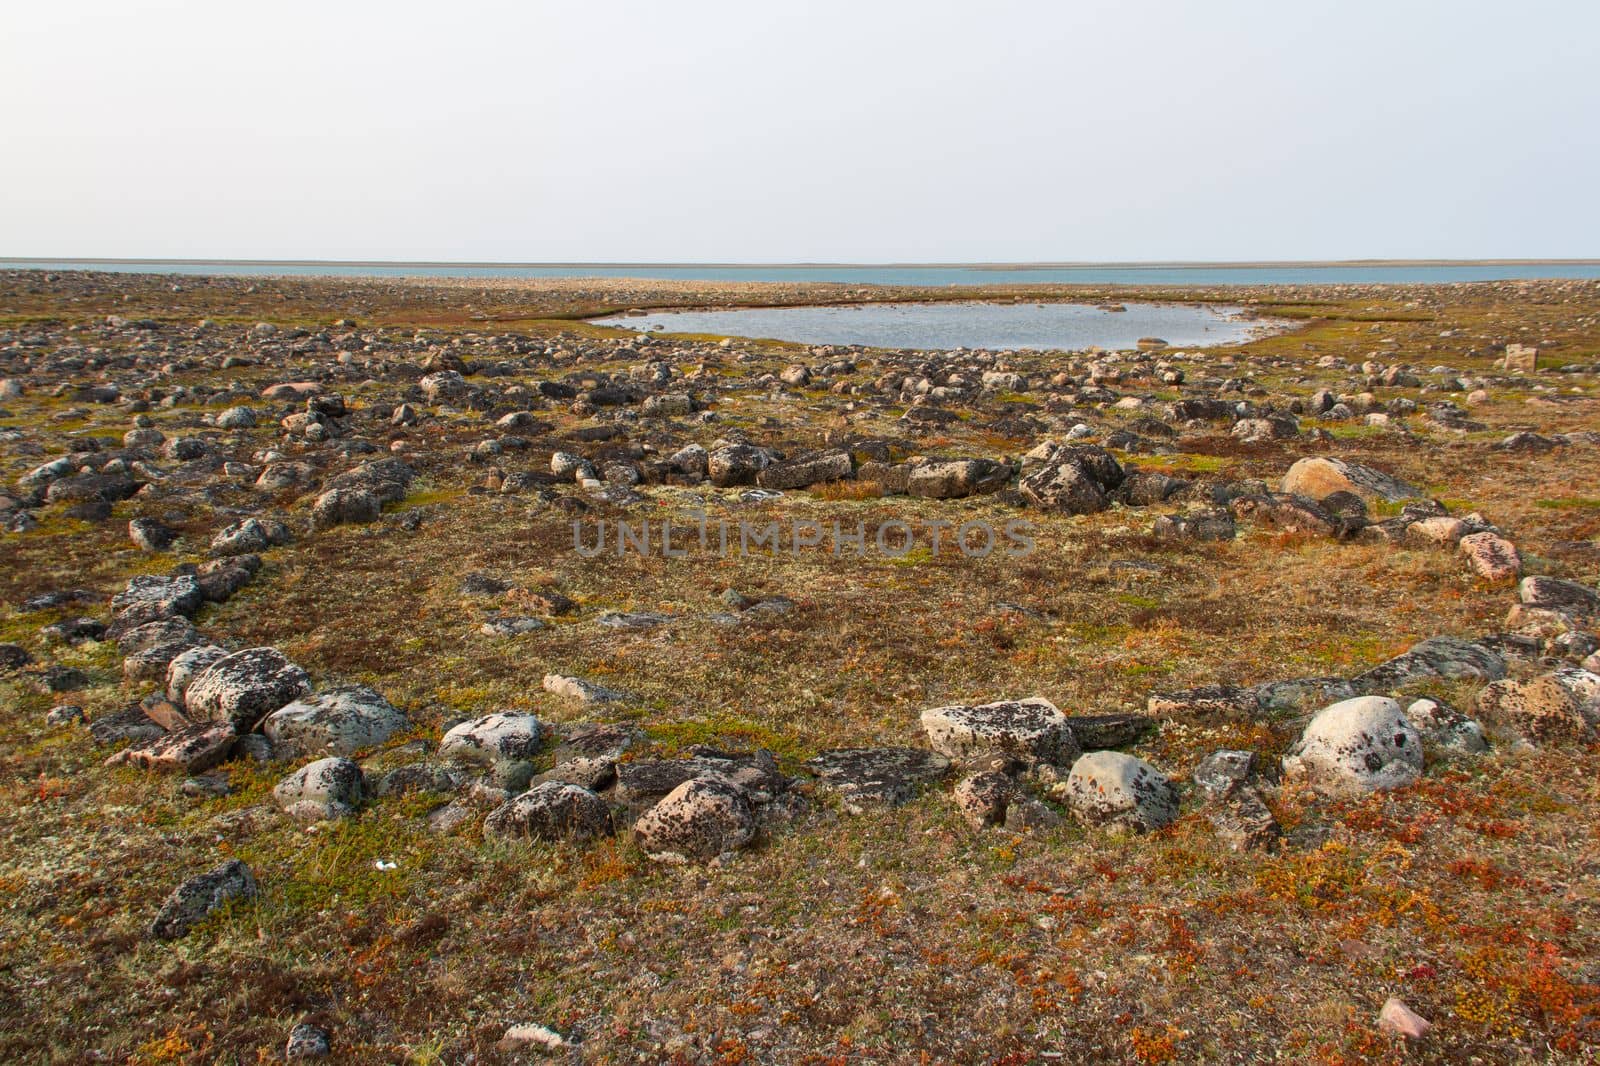 Remains of Inuit tent ring along the coast of Hudson Bay north of Arviat at a place called Qikiqtarjuq, Nunavut, Canada